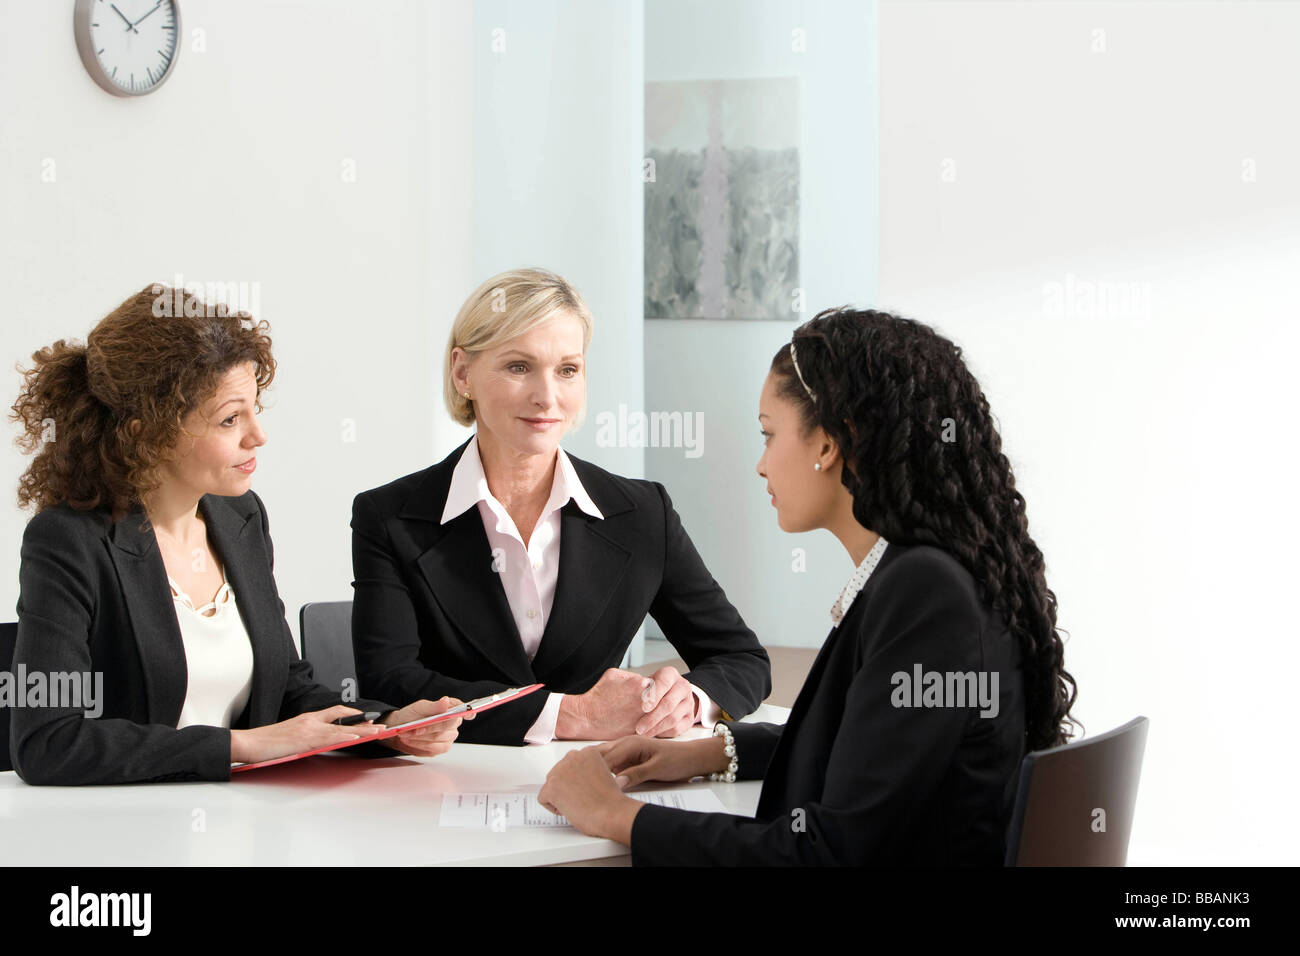 Two business women conduct an interview Stock Photo